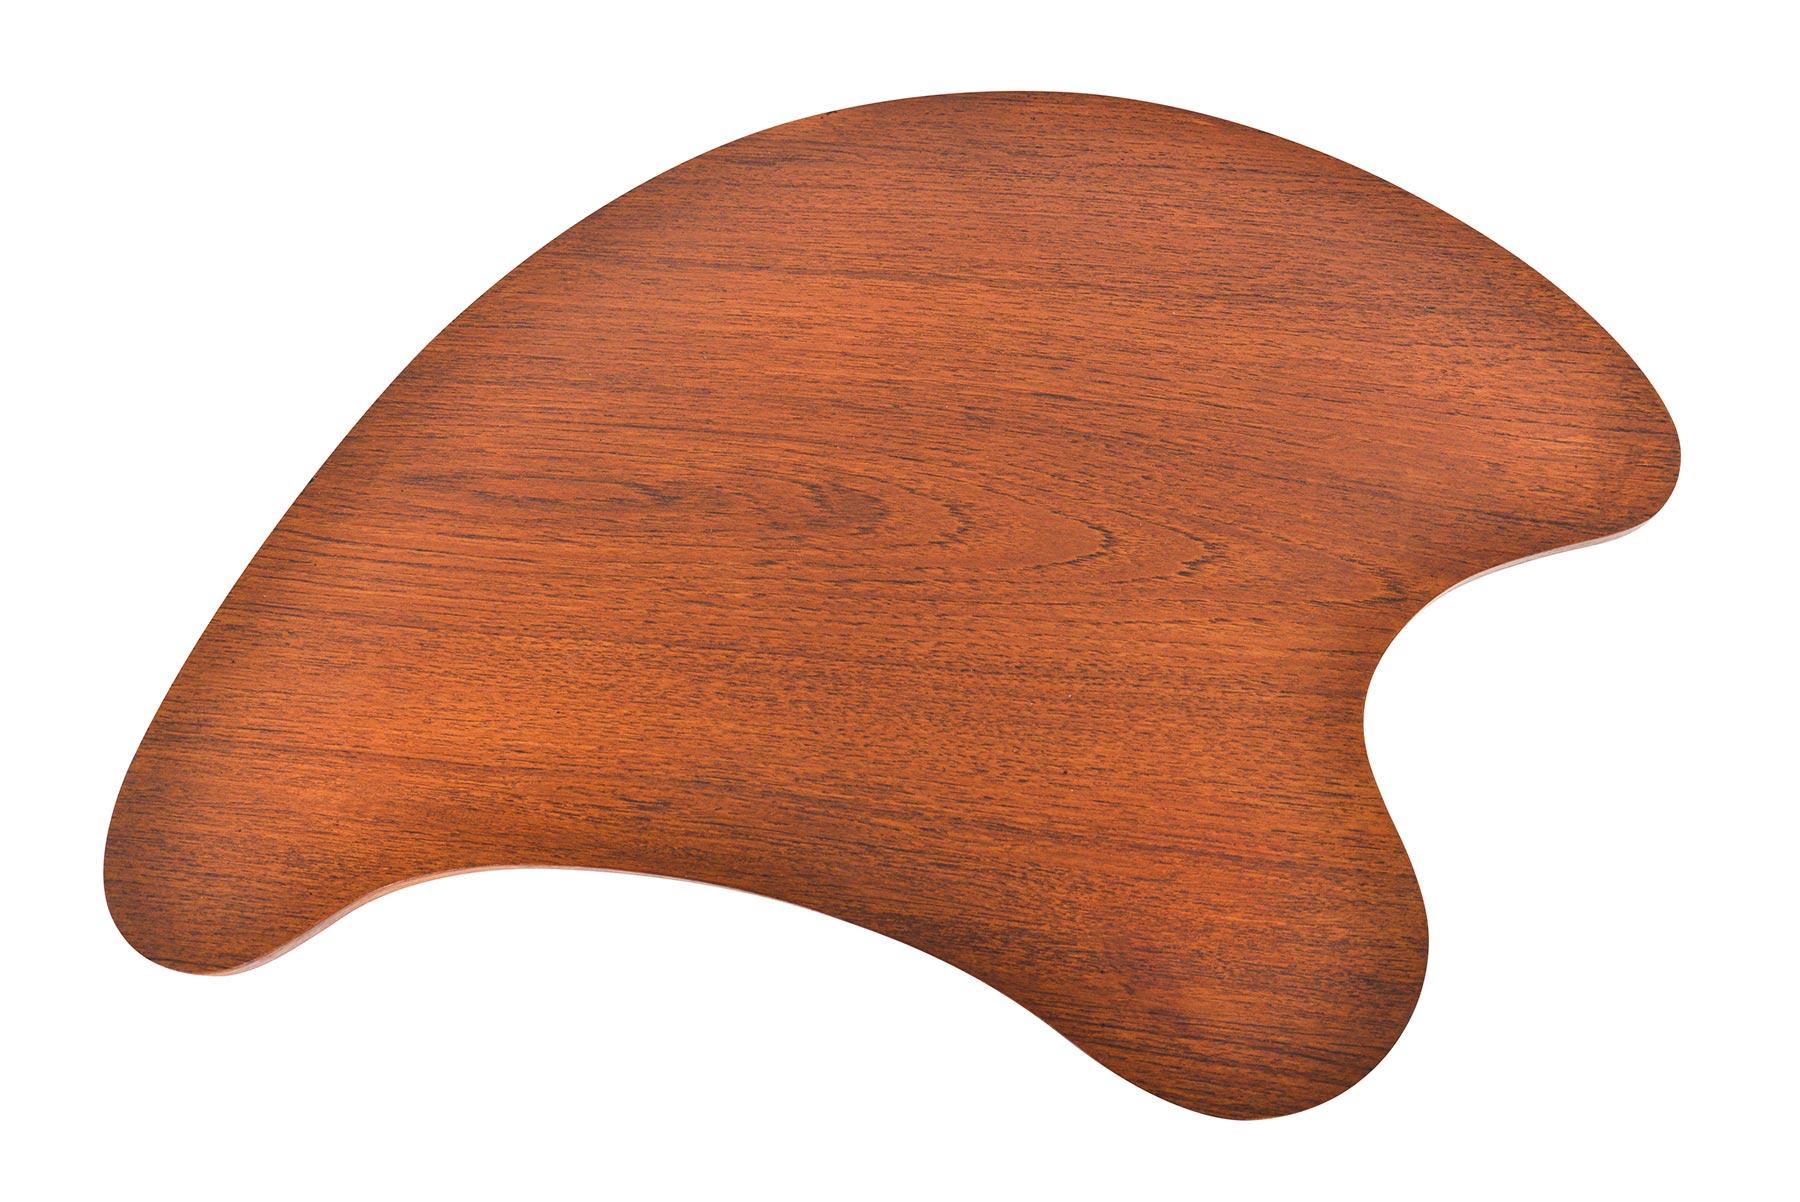 This Danish modern biomorphic shaped side table in teak is finished on all sides and offers organic lines. This rare find is a perfect companion piece for any lounge chair, sofa, or bedside. In excellent vintage condition.

  